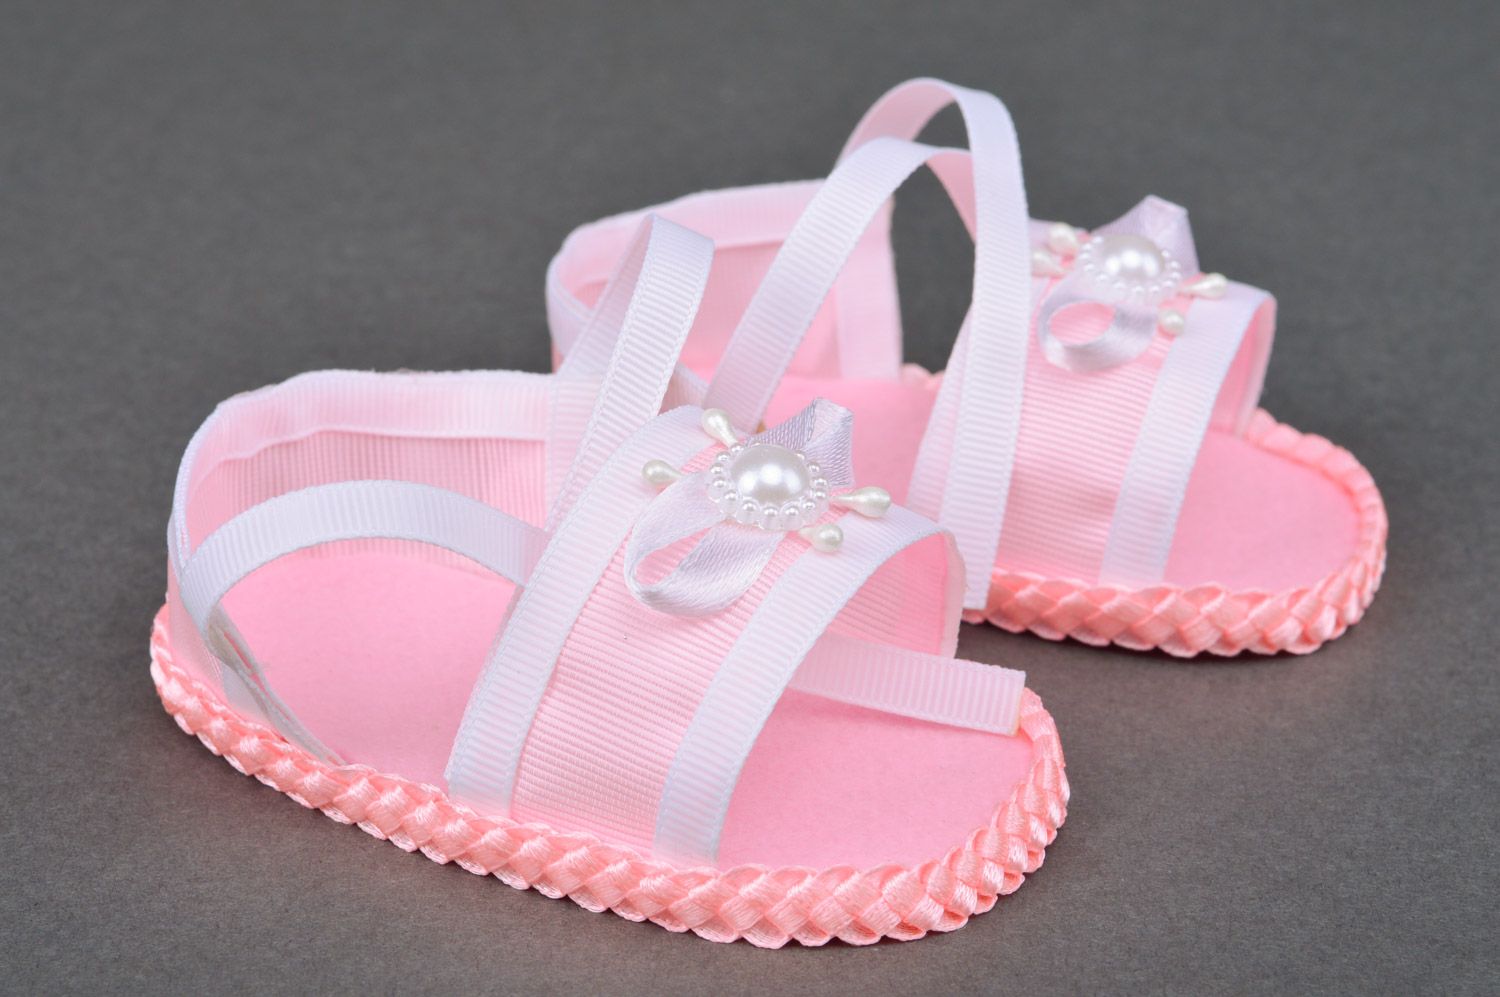 Handmade beautiful pink baby girl sandals sewn of felt and rep ribbons photo 3